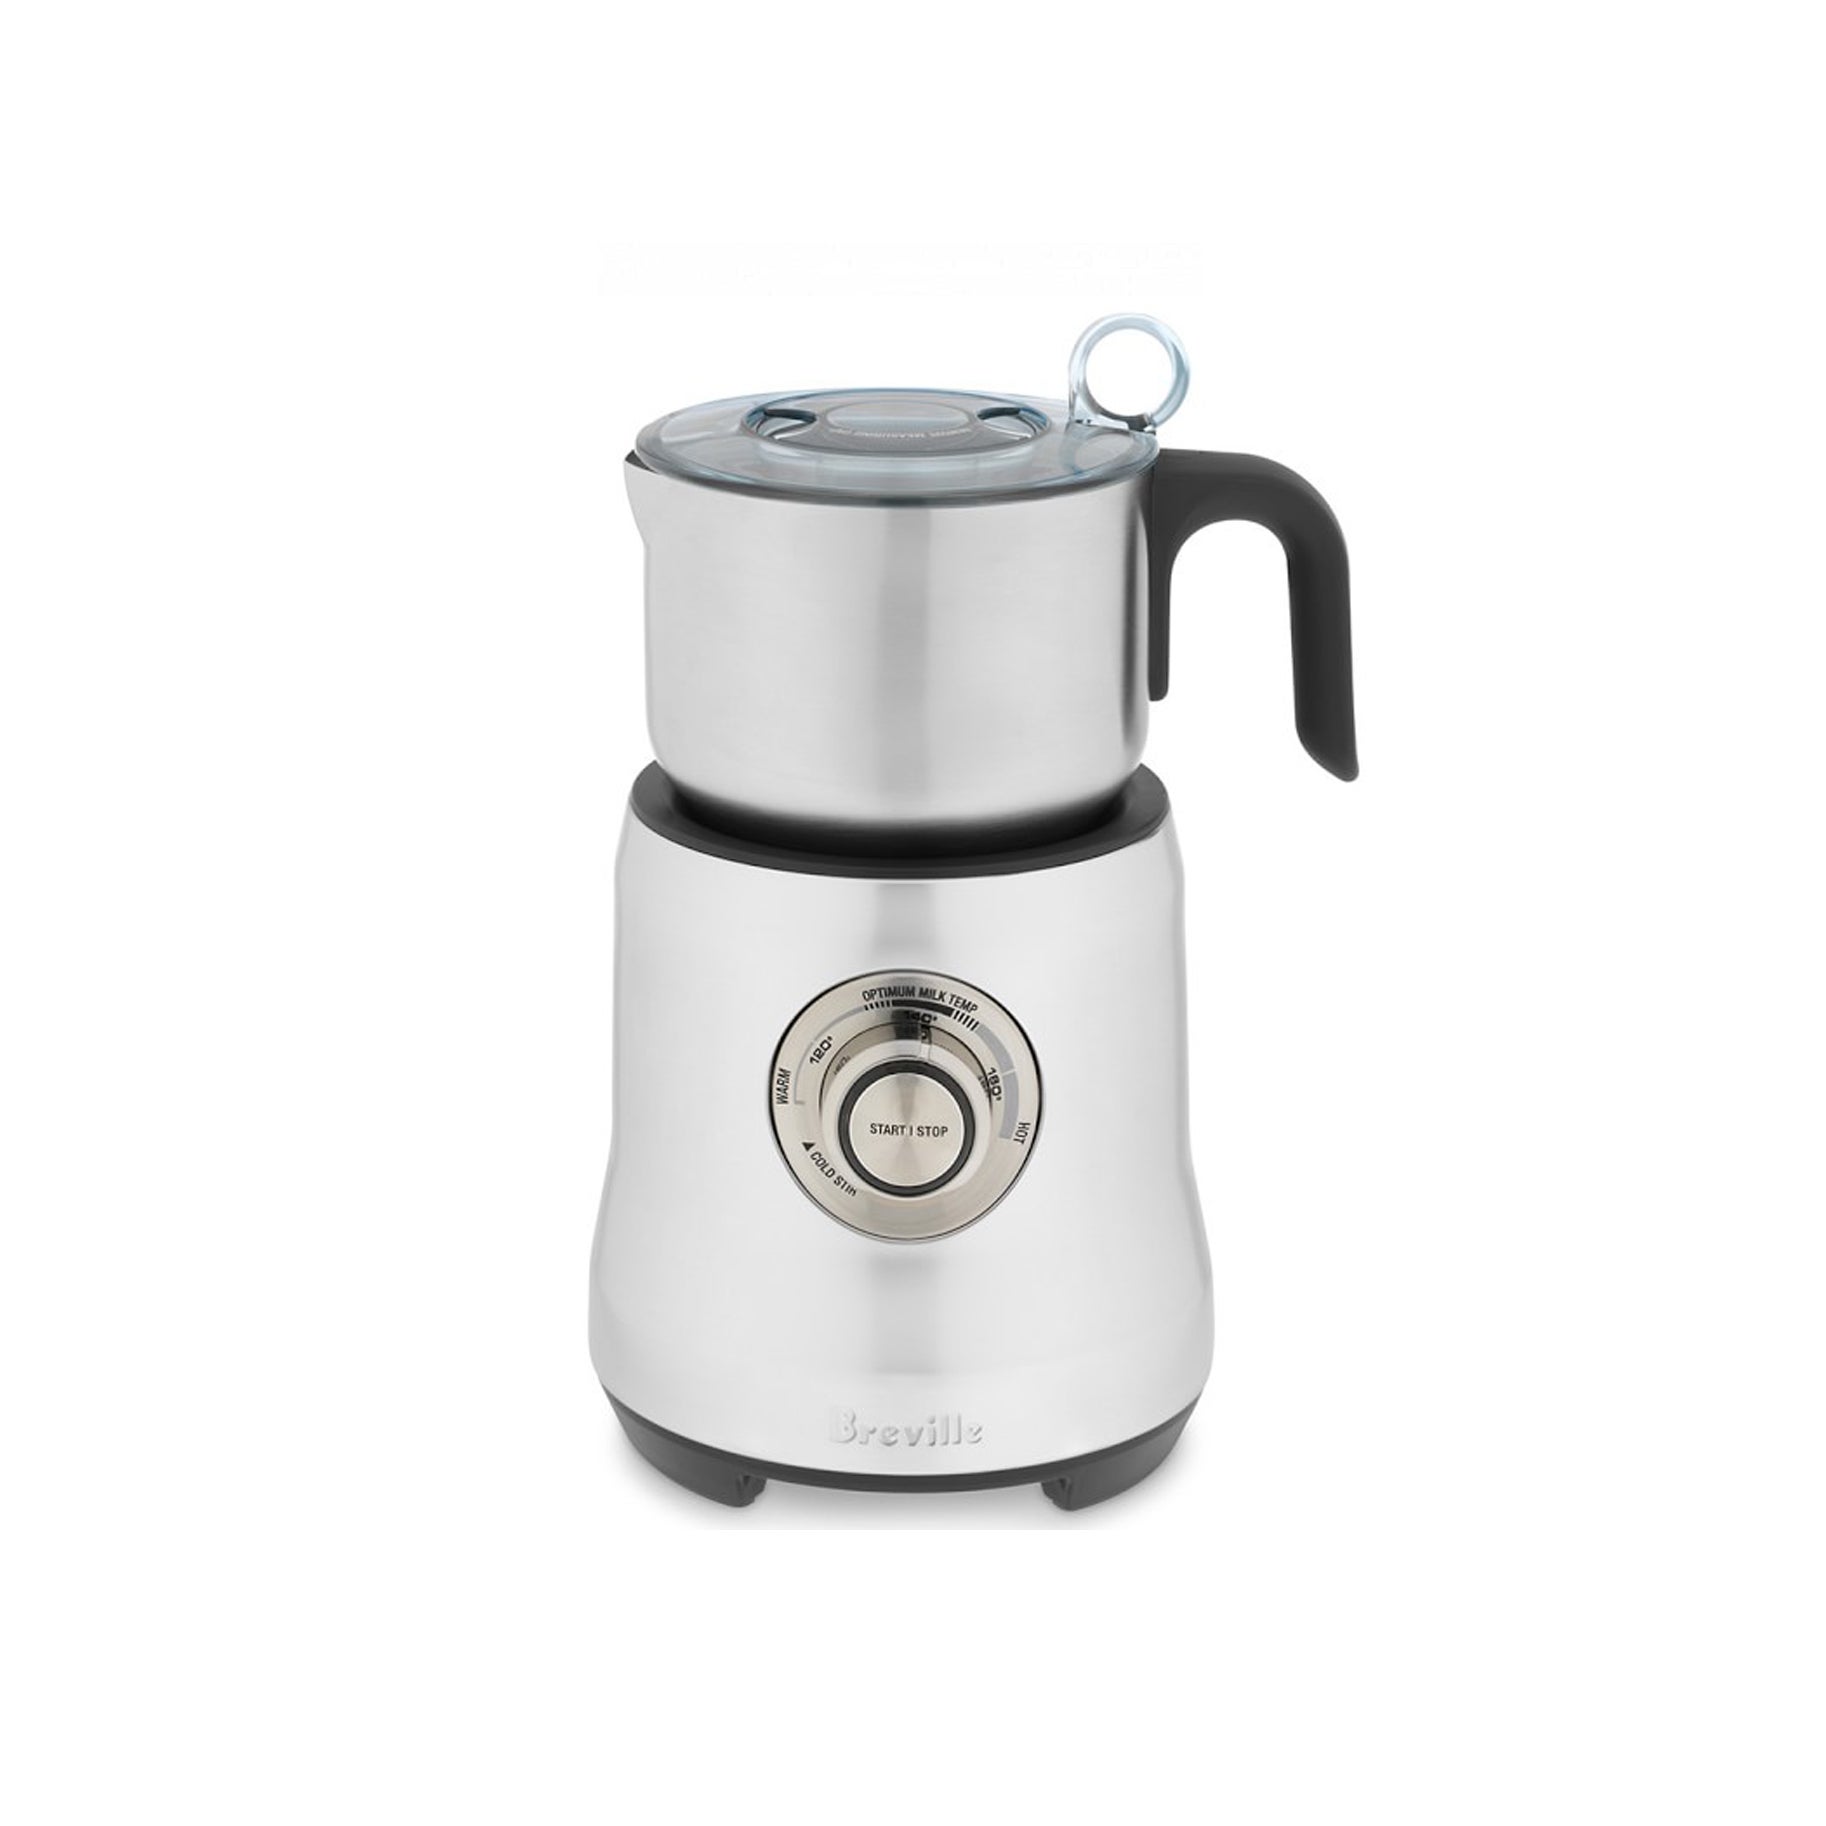 https://www.saveur.com/uploads/2021/08/27/The-Best-Milk-Frother-Option-Breville-The-Milk-Cafe-Electric-Frother.jpg?auto=webp